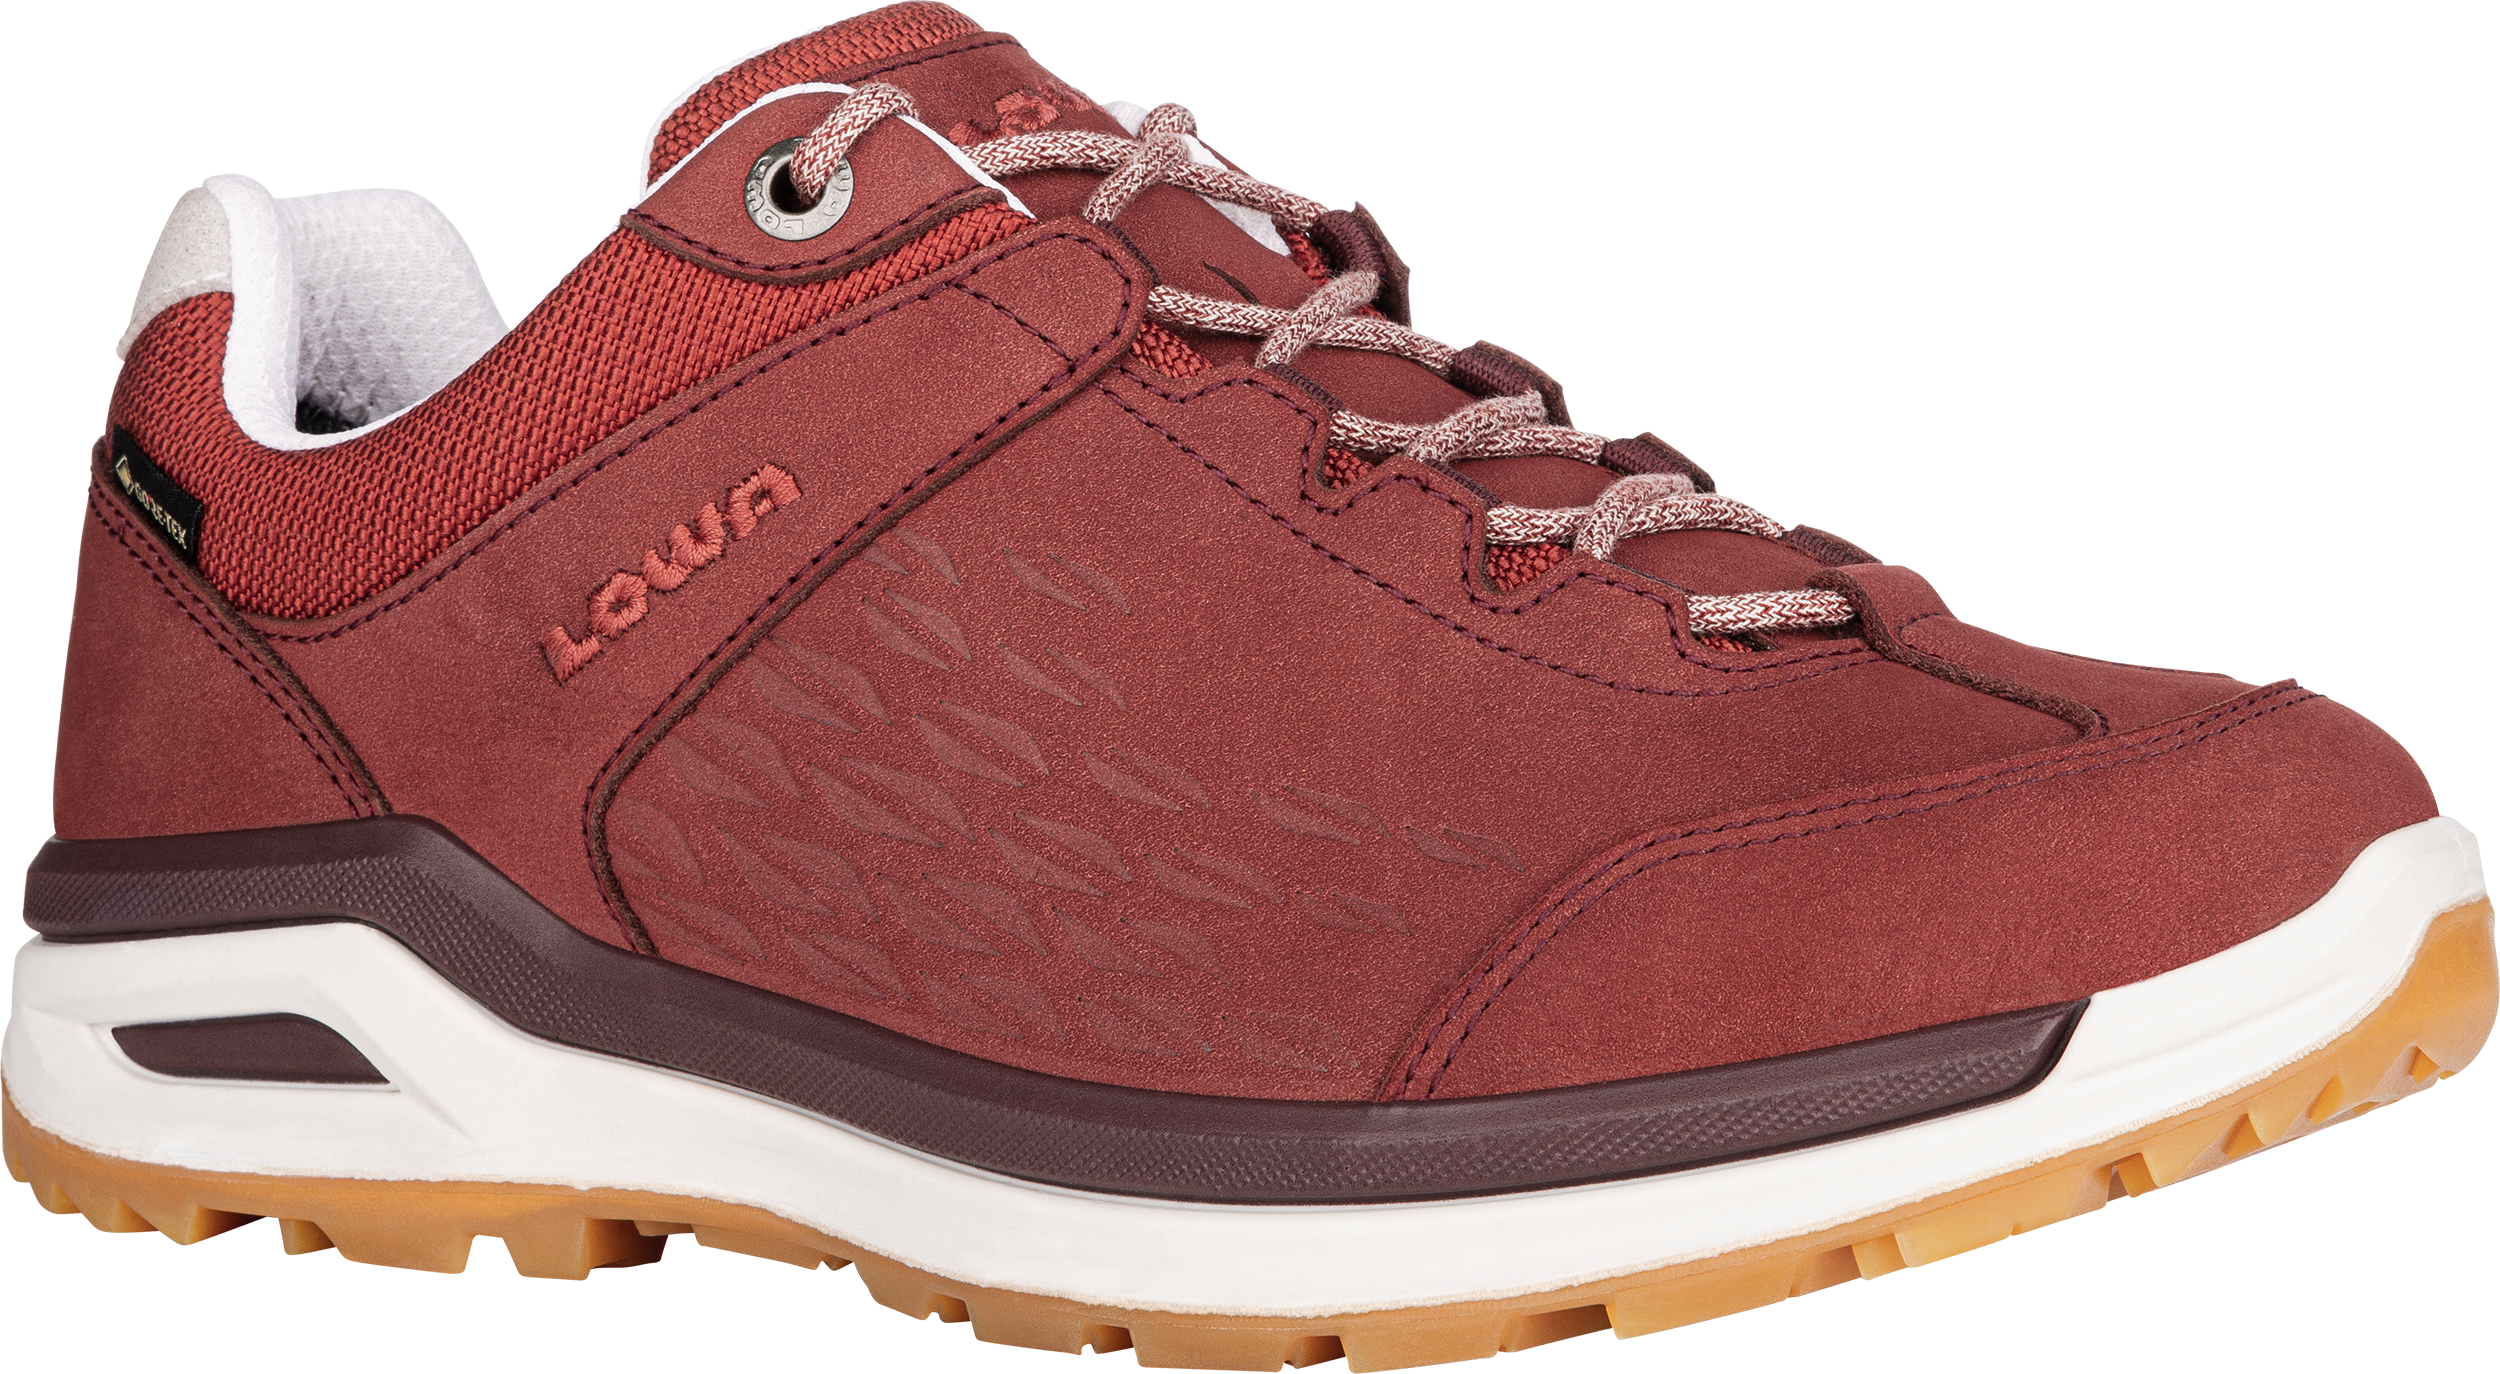 Sada mobiel te ontvangen LOCARNO GTX LO Ws: EVERYDAY shoes for women: Functionality and style | LOWA  INT